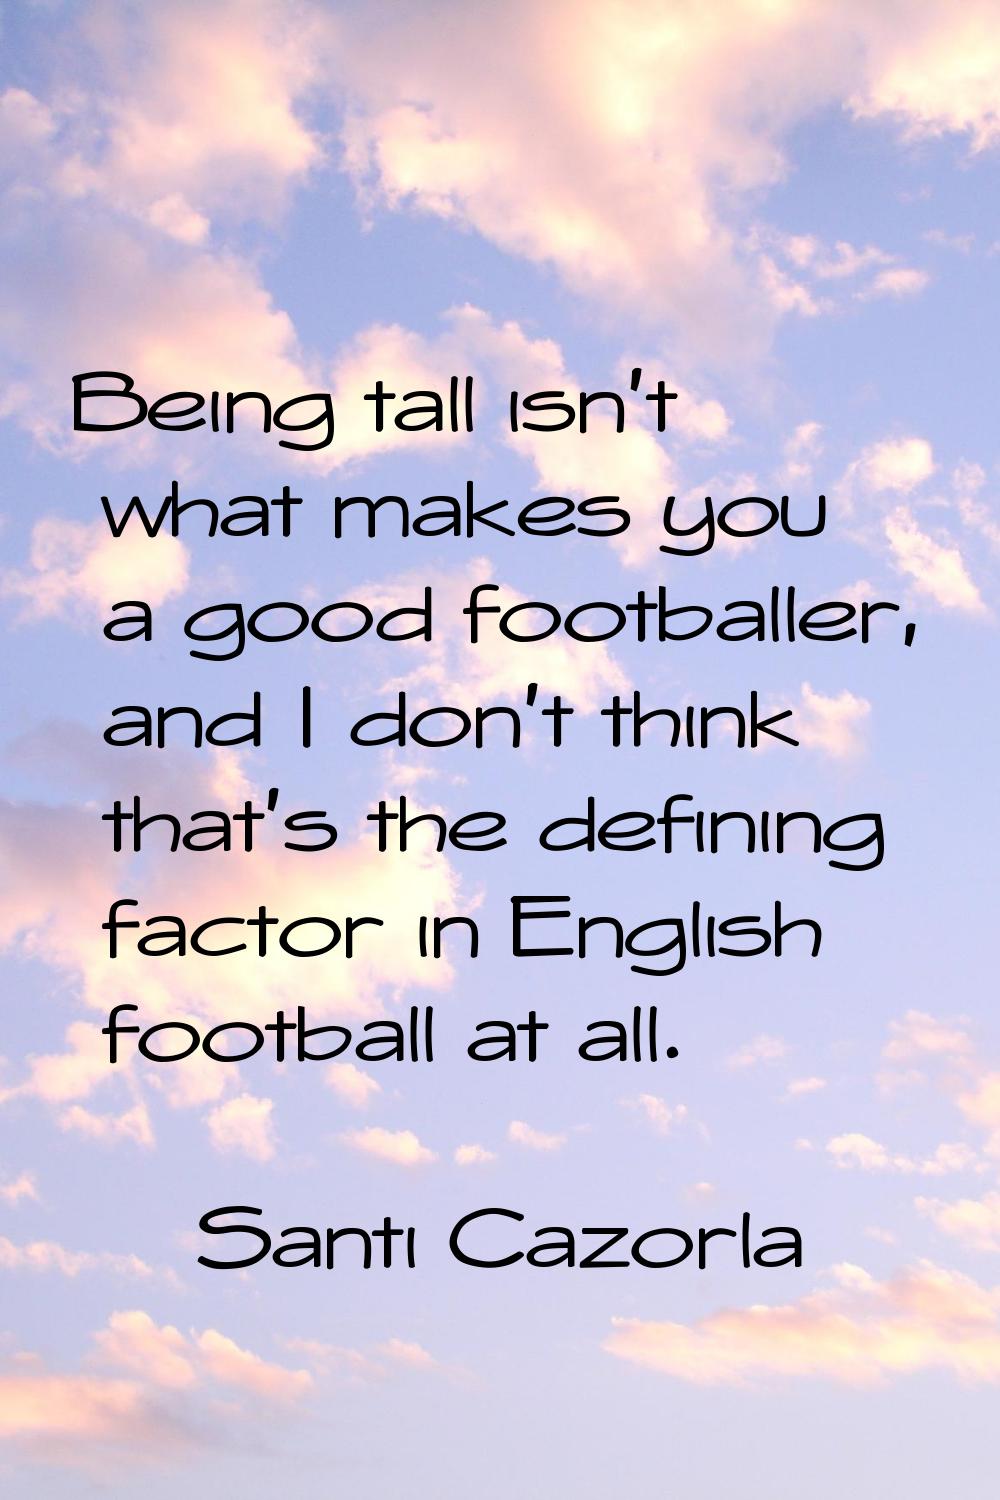 Being tall isn't what makes you a good footballer, and I don't think that's the defining factor in 